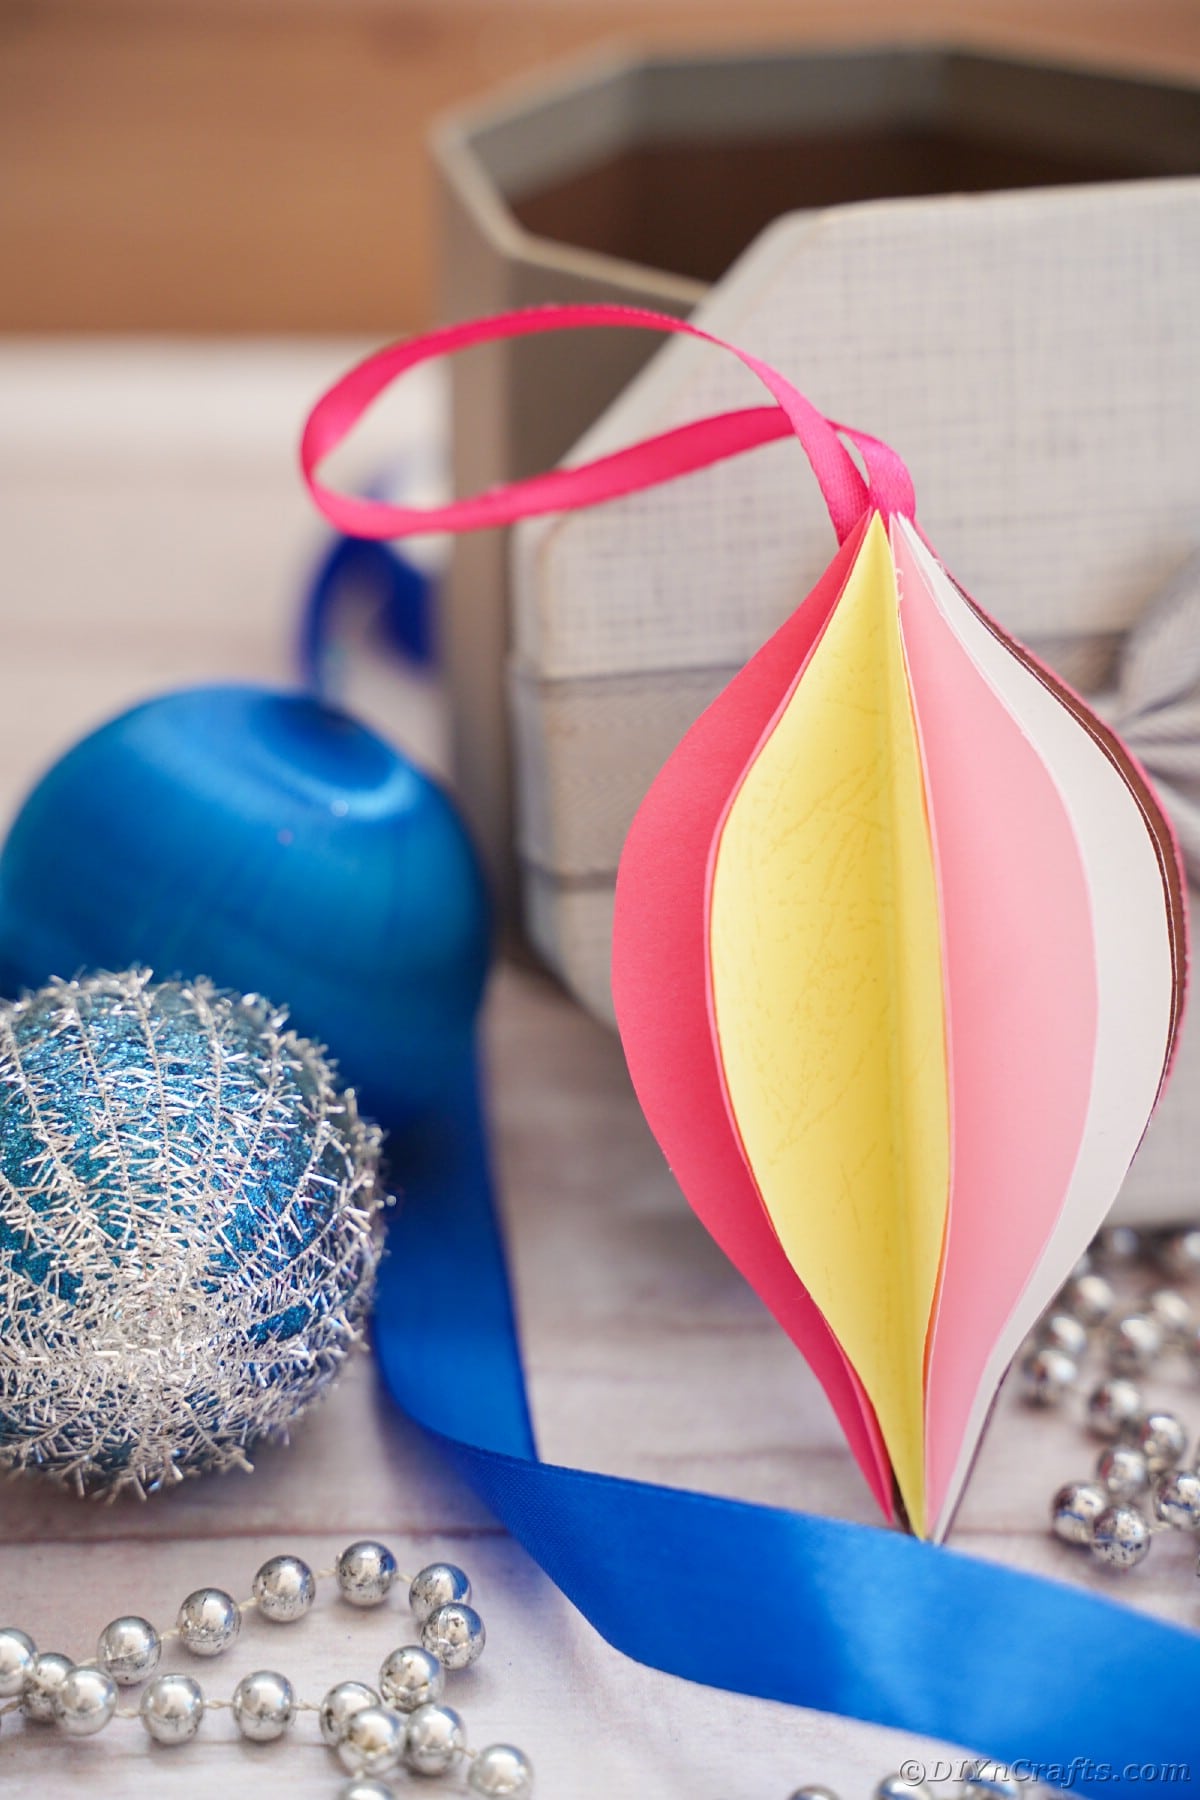 pink and yellow paper ornament in front of blue holiday decor